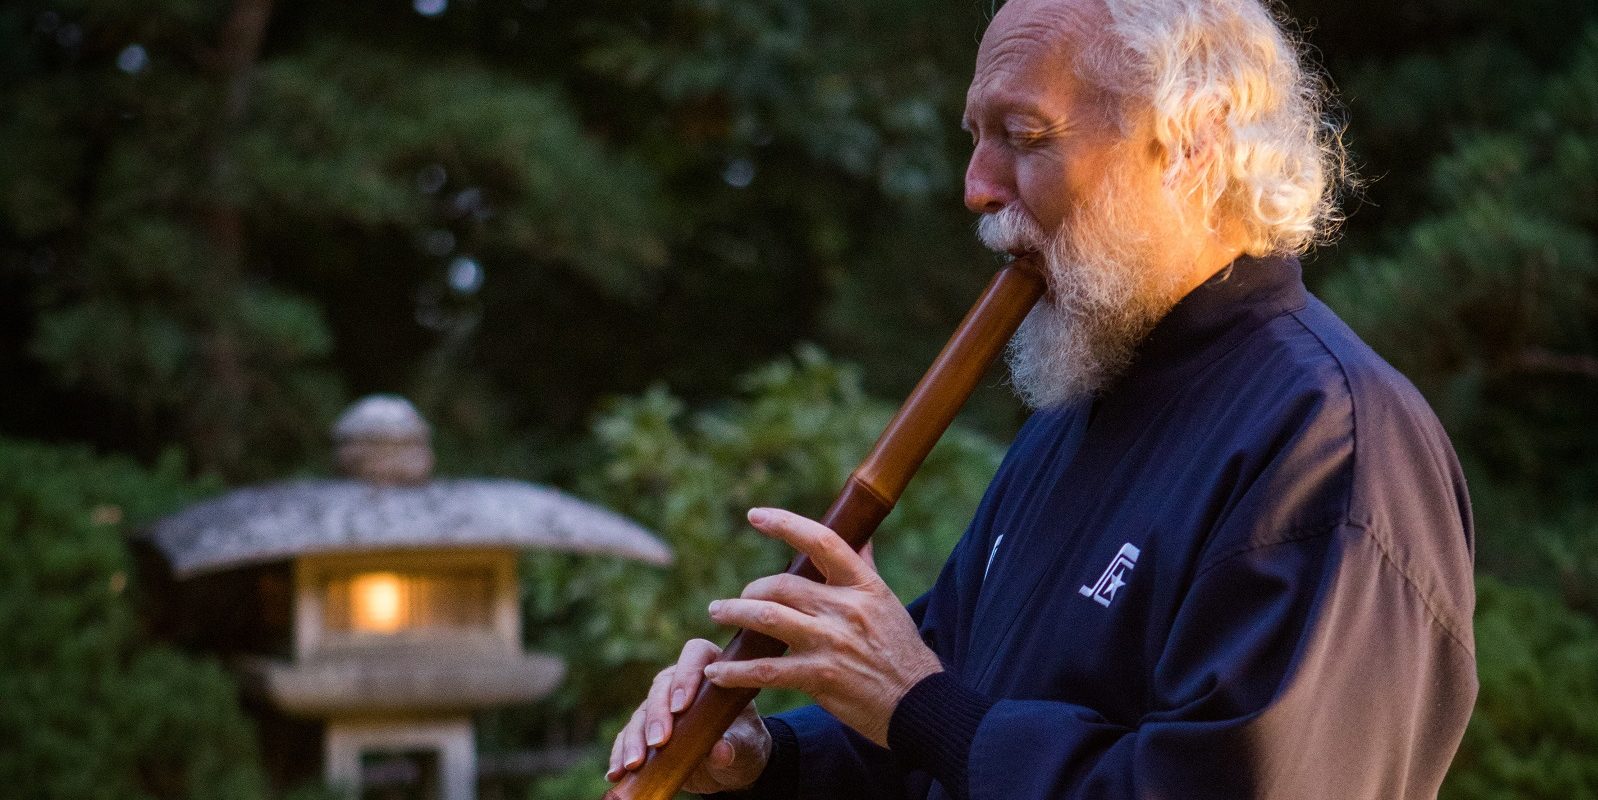 Larry Tyrrell performing shakuhachi at the Moonviewing Festival